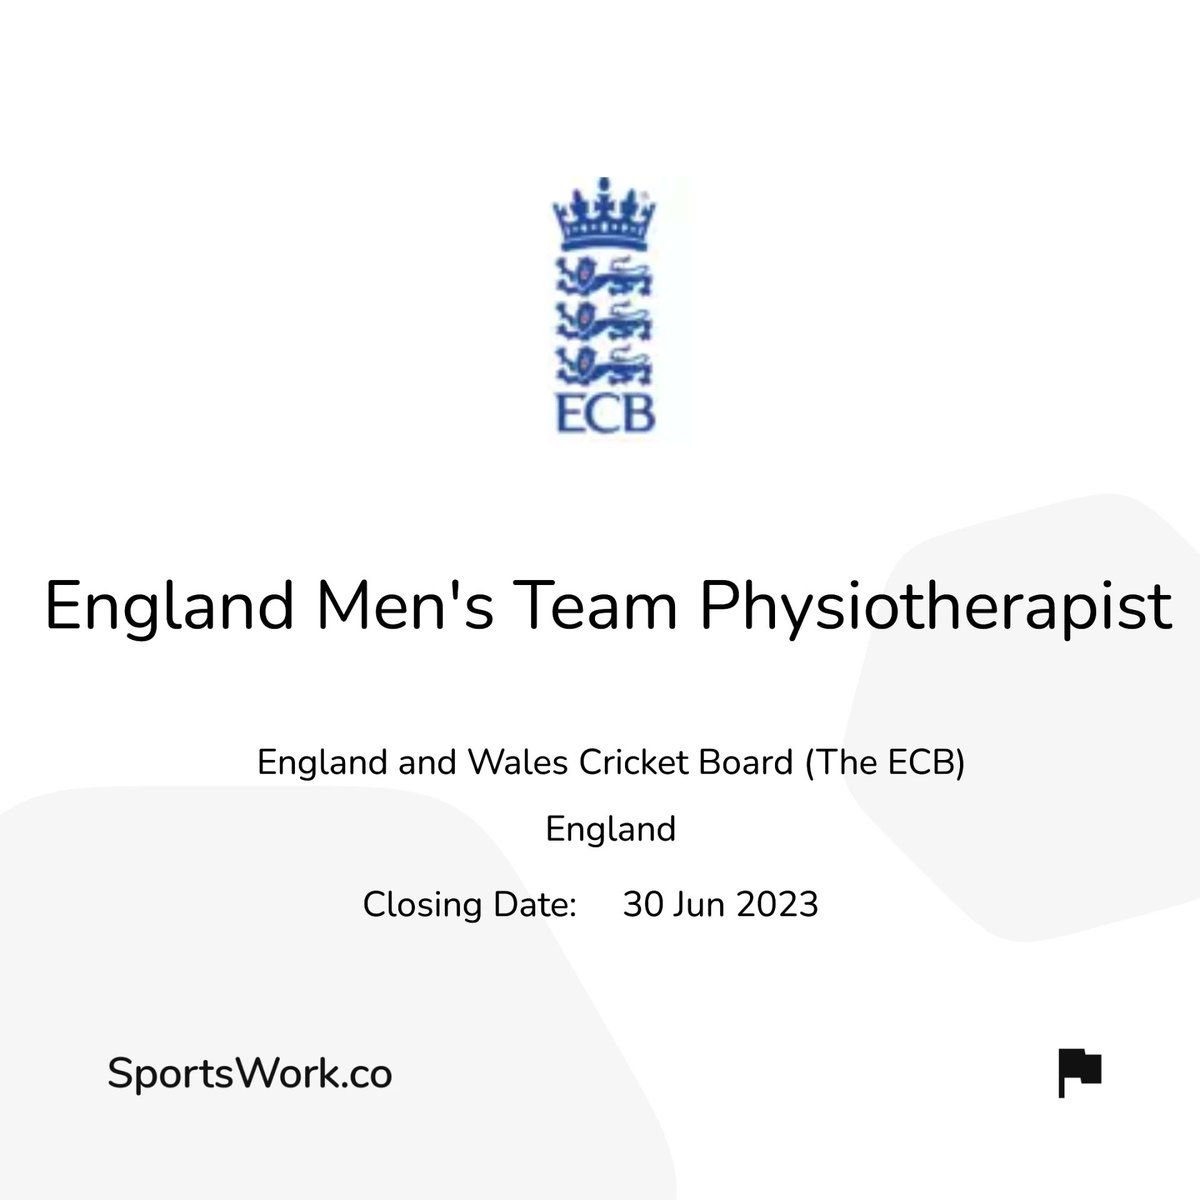 ⭐️  New Vacancy

🏏 England & Wales Cricket Board (The ECB)

🤲 England Men's Team Physiotherapist

📍 England

More information can be found here - sportswork.co/jobs/england-a…

#sportswork #sportsjobs #workinsport #England